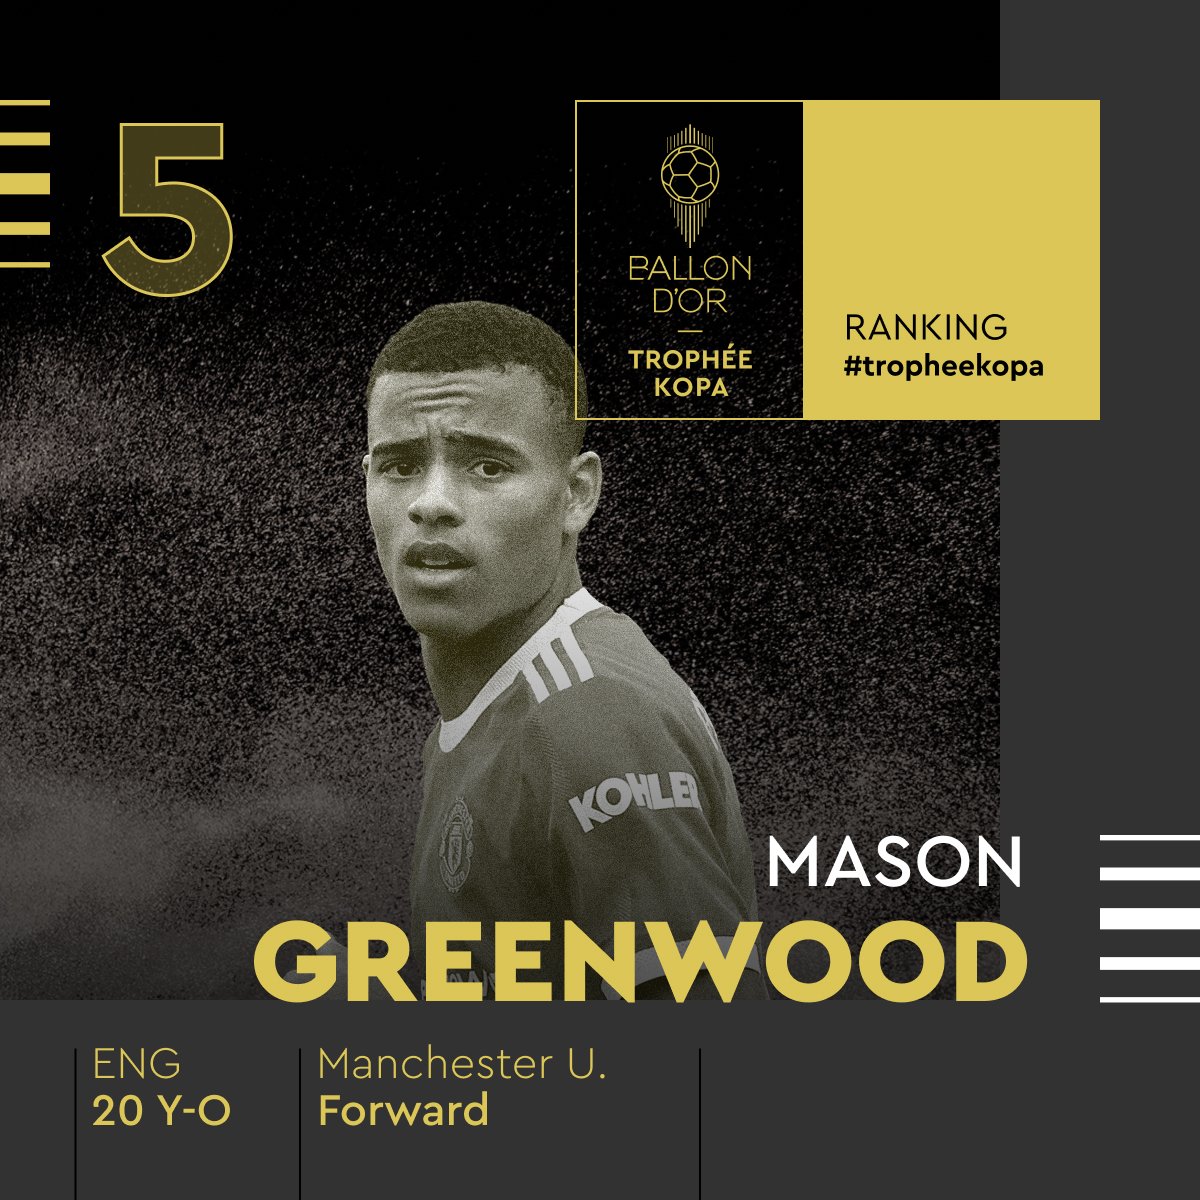 Official: Mason Greenwood finishes fifth in the #TropheeKopa award #mulive